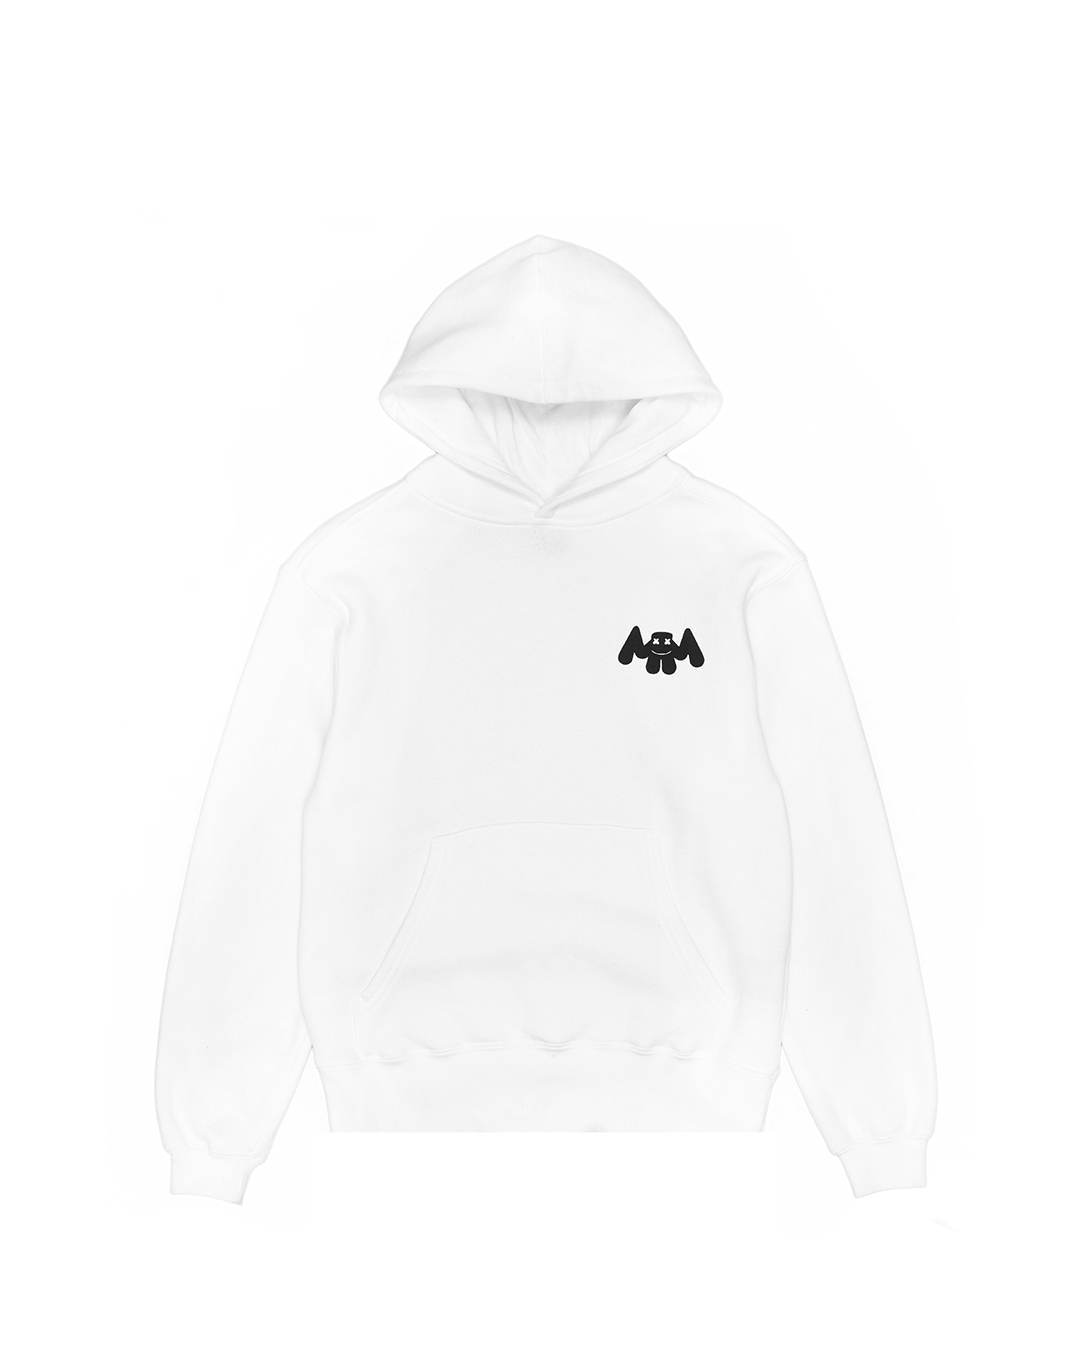 Mello Made It Right Youth Hoodie